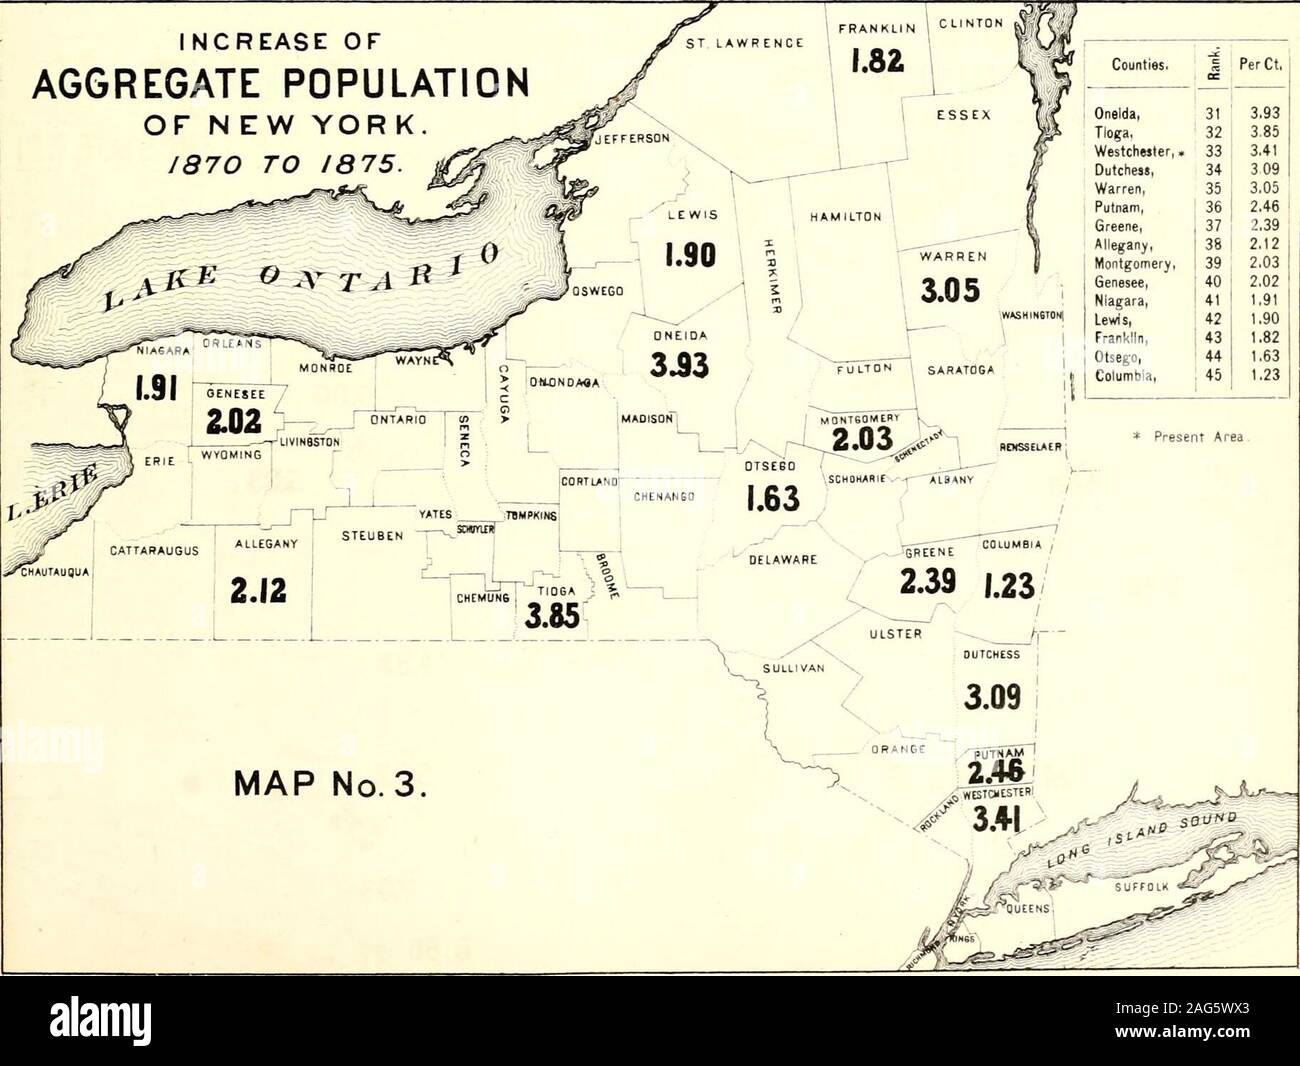 . Census of the state of New York for 1875. INCREASE OF AGGREGATE POPULATION OF N EW YORK1870 TO 1875.  ^ Counties. & PerCt, Oneida, 31 3,93 Tioga. 32 3,85 Westchester,. 33 3.41 Dutchess, 34 3 09 Warren, 35 3.05 Putnam, 36 2.46 Greene, 37 2.39 Allegany, 38 2.12 Montgomery, 39 2,03 Senesee, 40 2.02 Niagara, 41 1.91 Lewis, 42 t.90 Frani&lt;lln, 43 1.82 Otsego, 44 1.63 Columbia, 45 1.23. ^ MapB. INCREASE OK NATIVE POPULATION OF NEW YORK. 1870 to 1875. INCREASE OF NATIVE POPULATION OF New YORK1870 TO 1875. 7^ / ST LAWRtNCi: 1 FRANKLIN Stock Photo